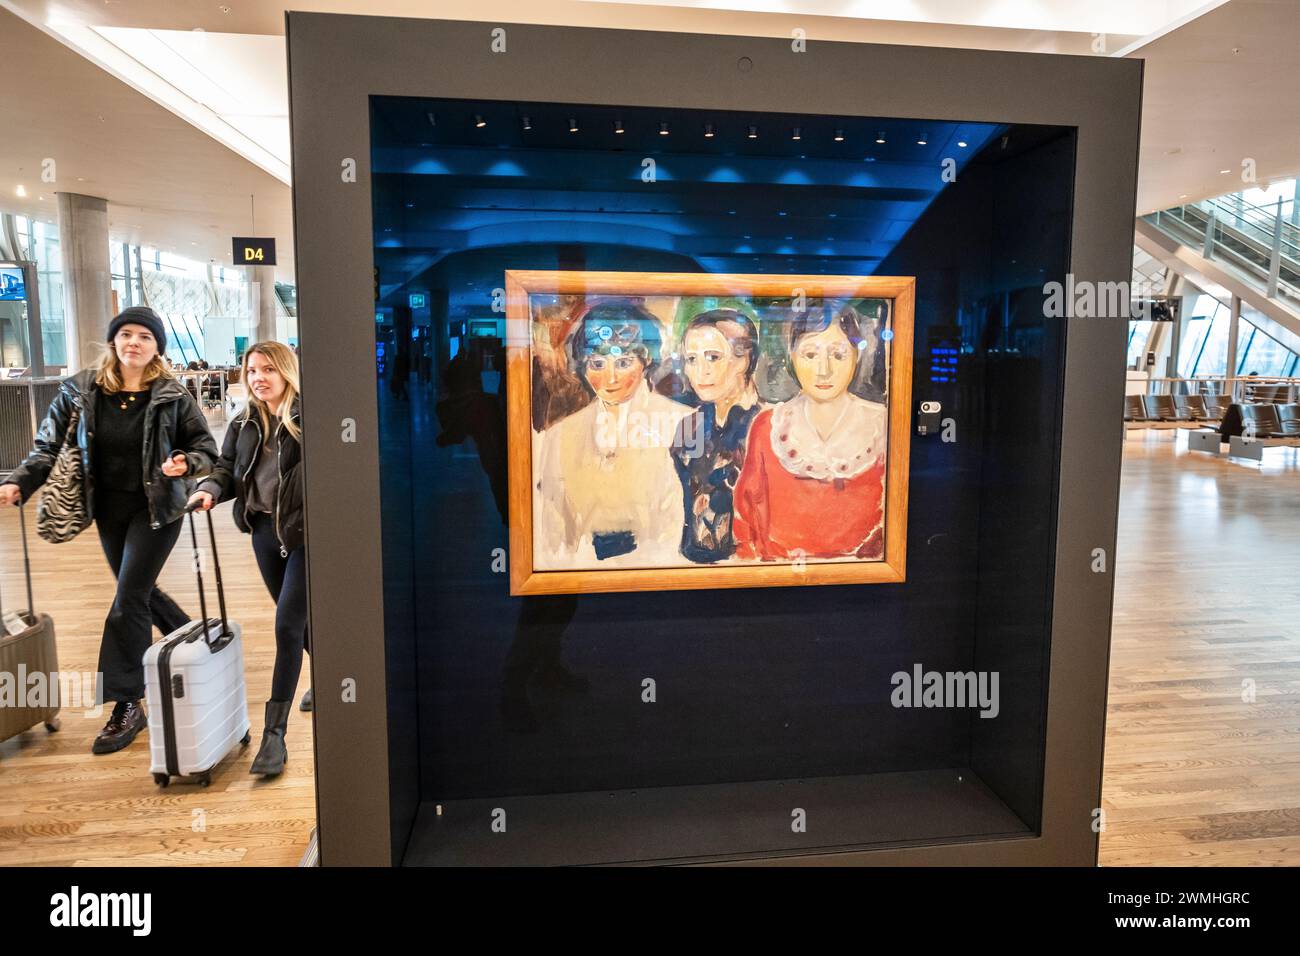 An Edvard Munch painting on display in the terminal at Oslo Gardemoen Airport, Norway Stock Photo